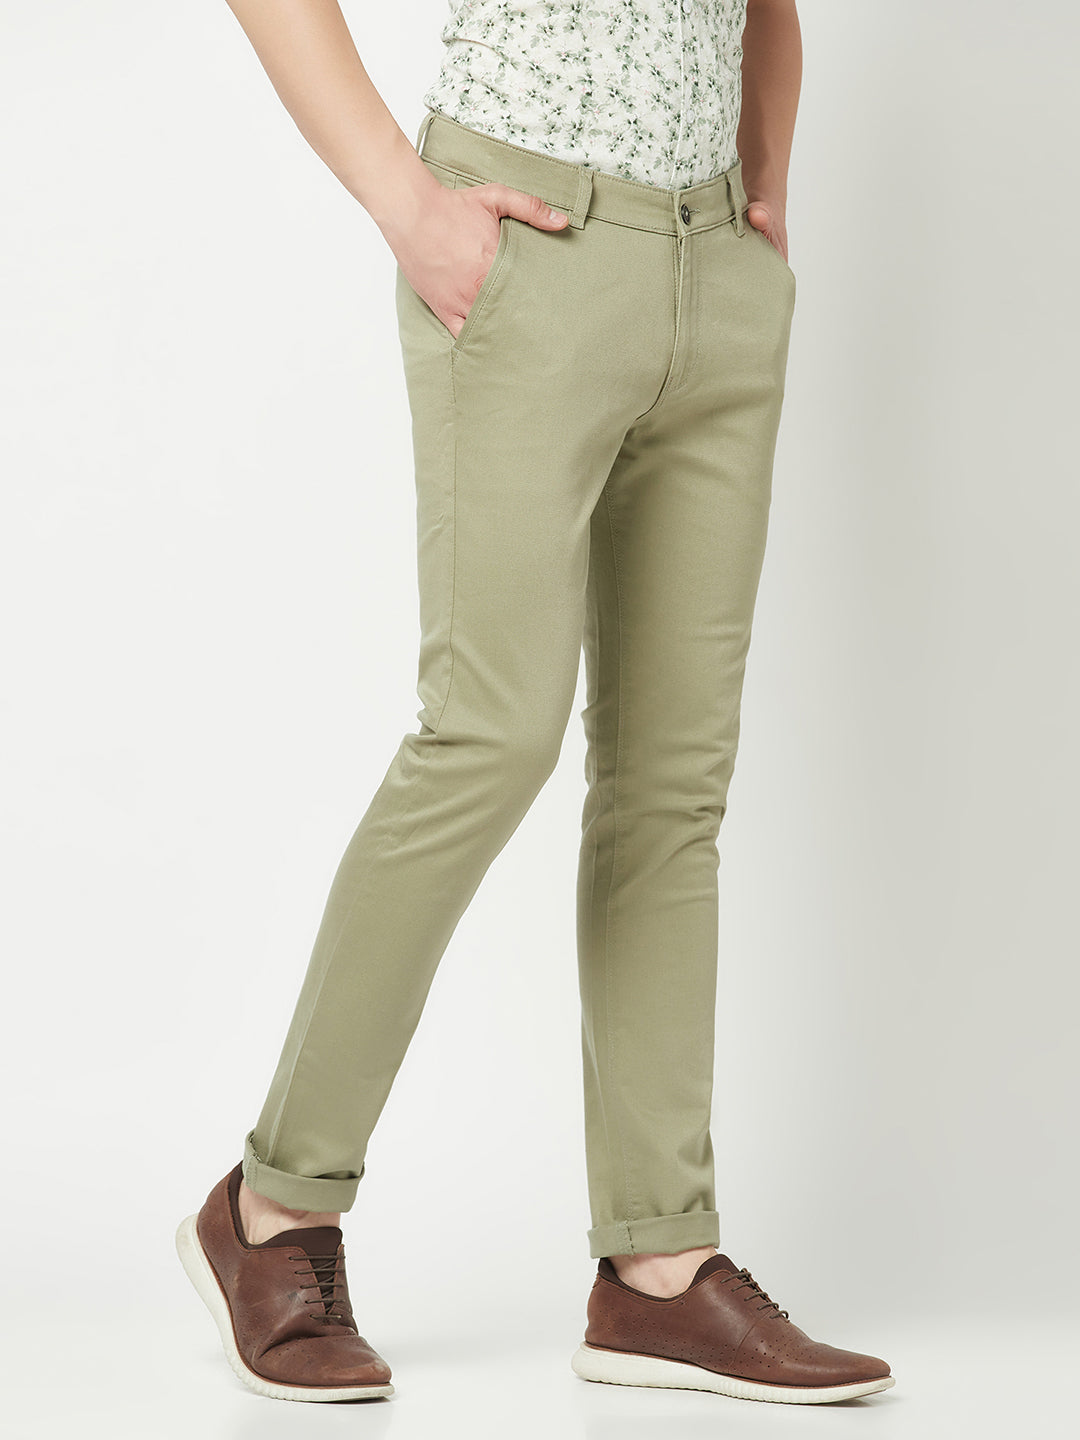 Yepme Pista Green Formal Shirt with Brown Trousers & Slip-on Shoes –  suprit-test